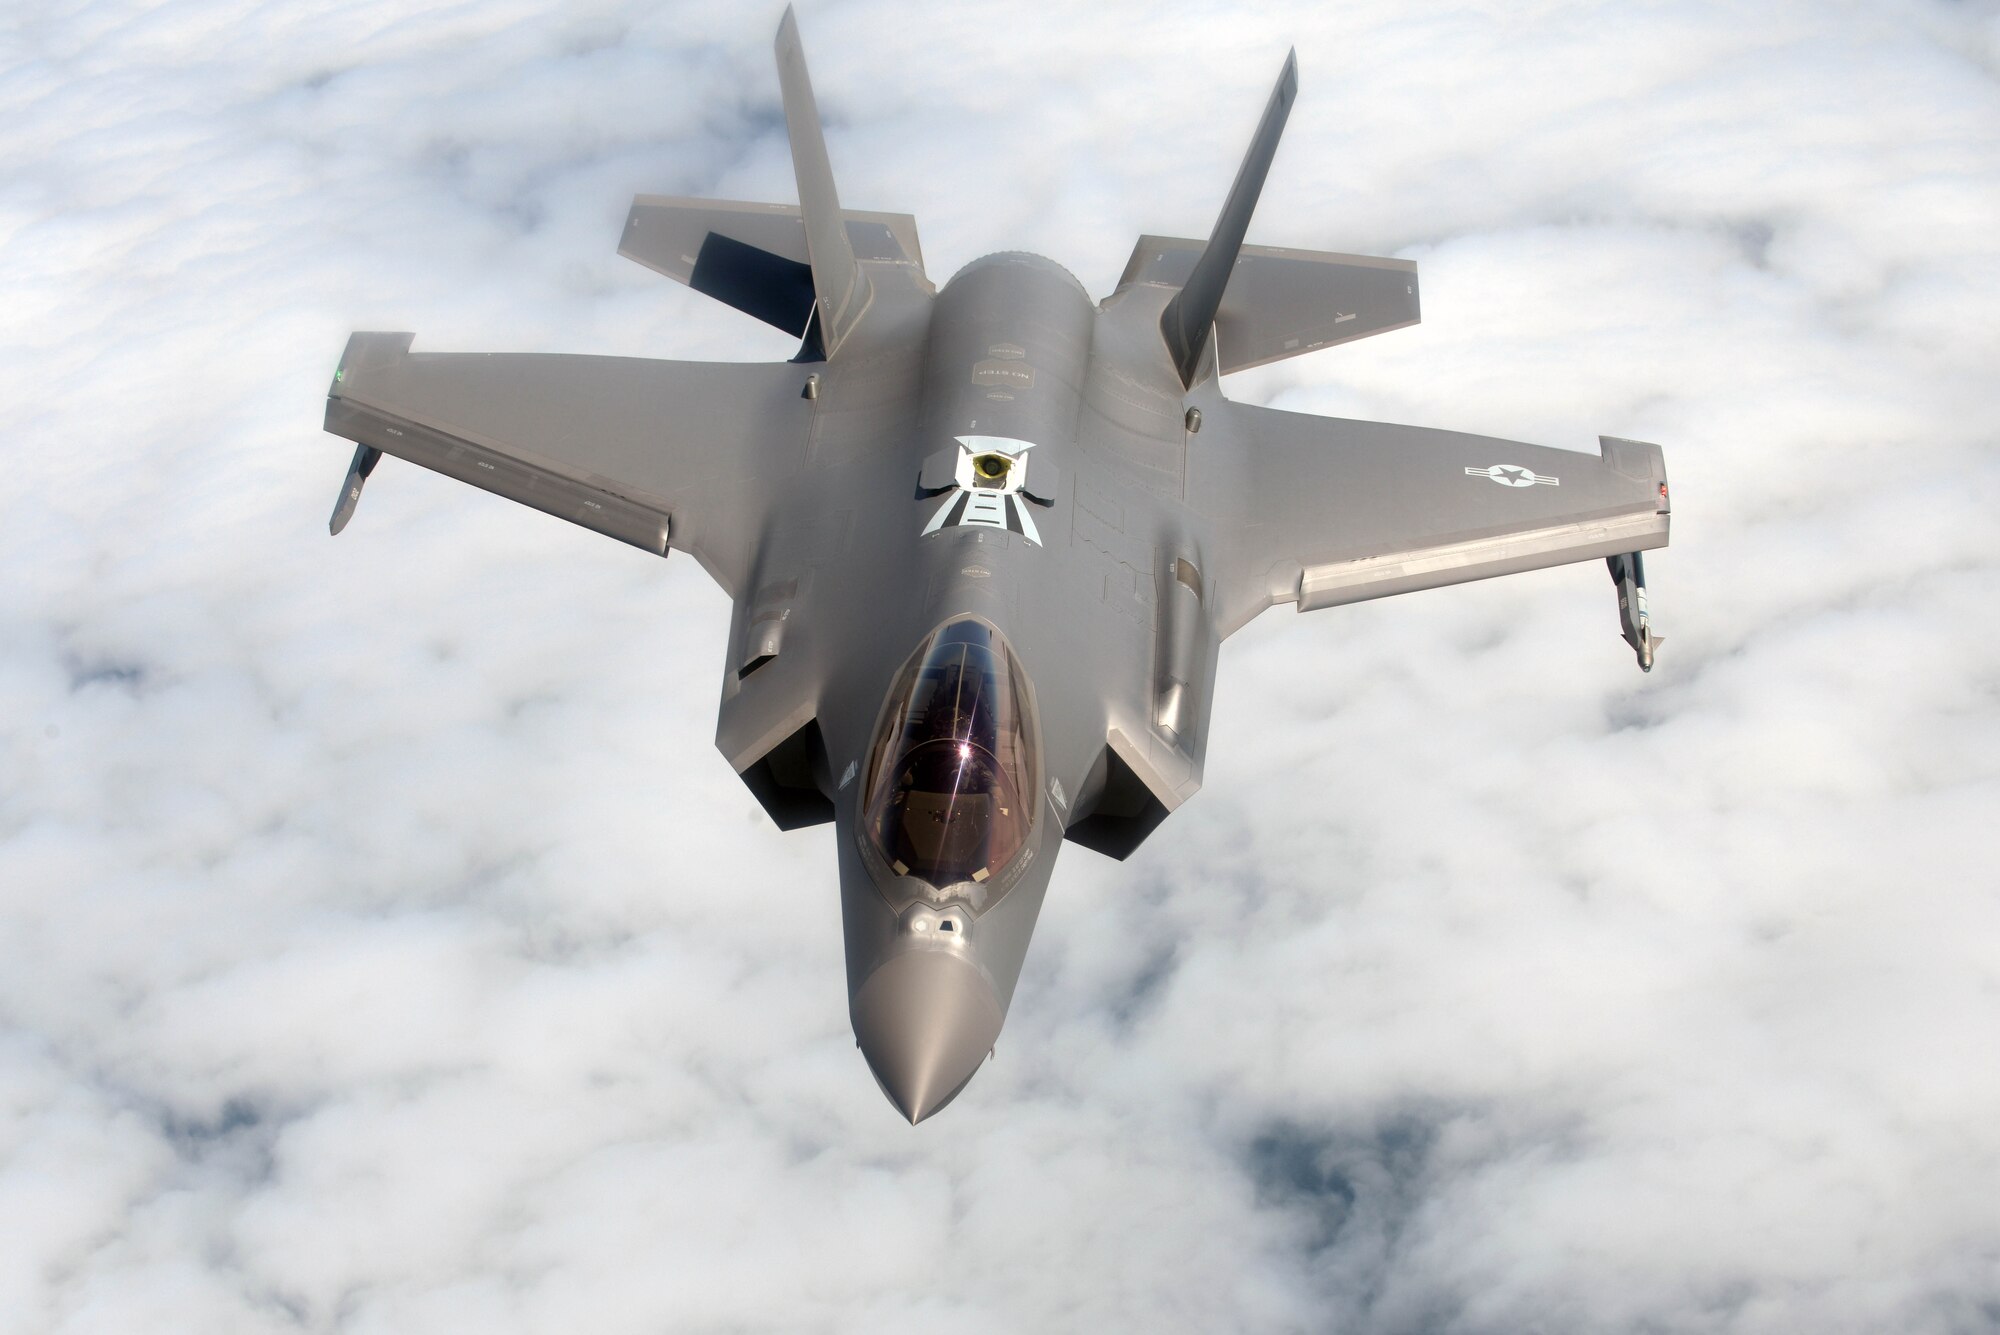 A U.S. Air Force F-35A Lightning II, assigned to the 388th Fighter Wing, descends below a U.S. Air Force KC-135 Stratotanker, assigned to RAF Mildenhall, England, during Exercise Point Blank over the North Sea, June 27, 2019. Training with joint partners, allied nations, and other U.S. Air Force units contributes to our ready and postured forces and enables us to build enduring and strategic relationships necessary to confront a broad range of global challenges. (U.S. Air Force photo by Senior Airman Benjamin Cooper)